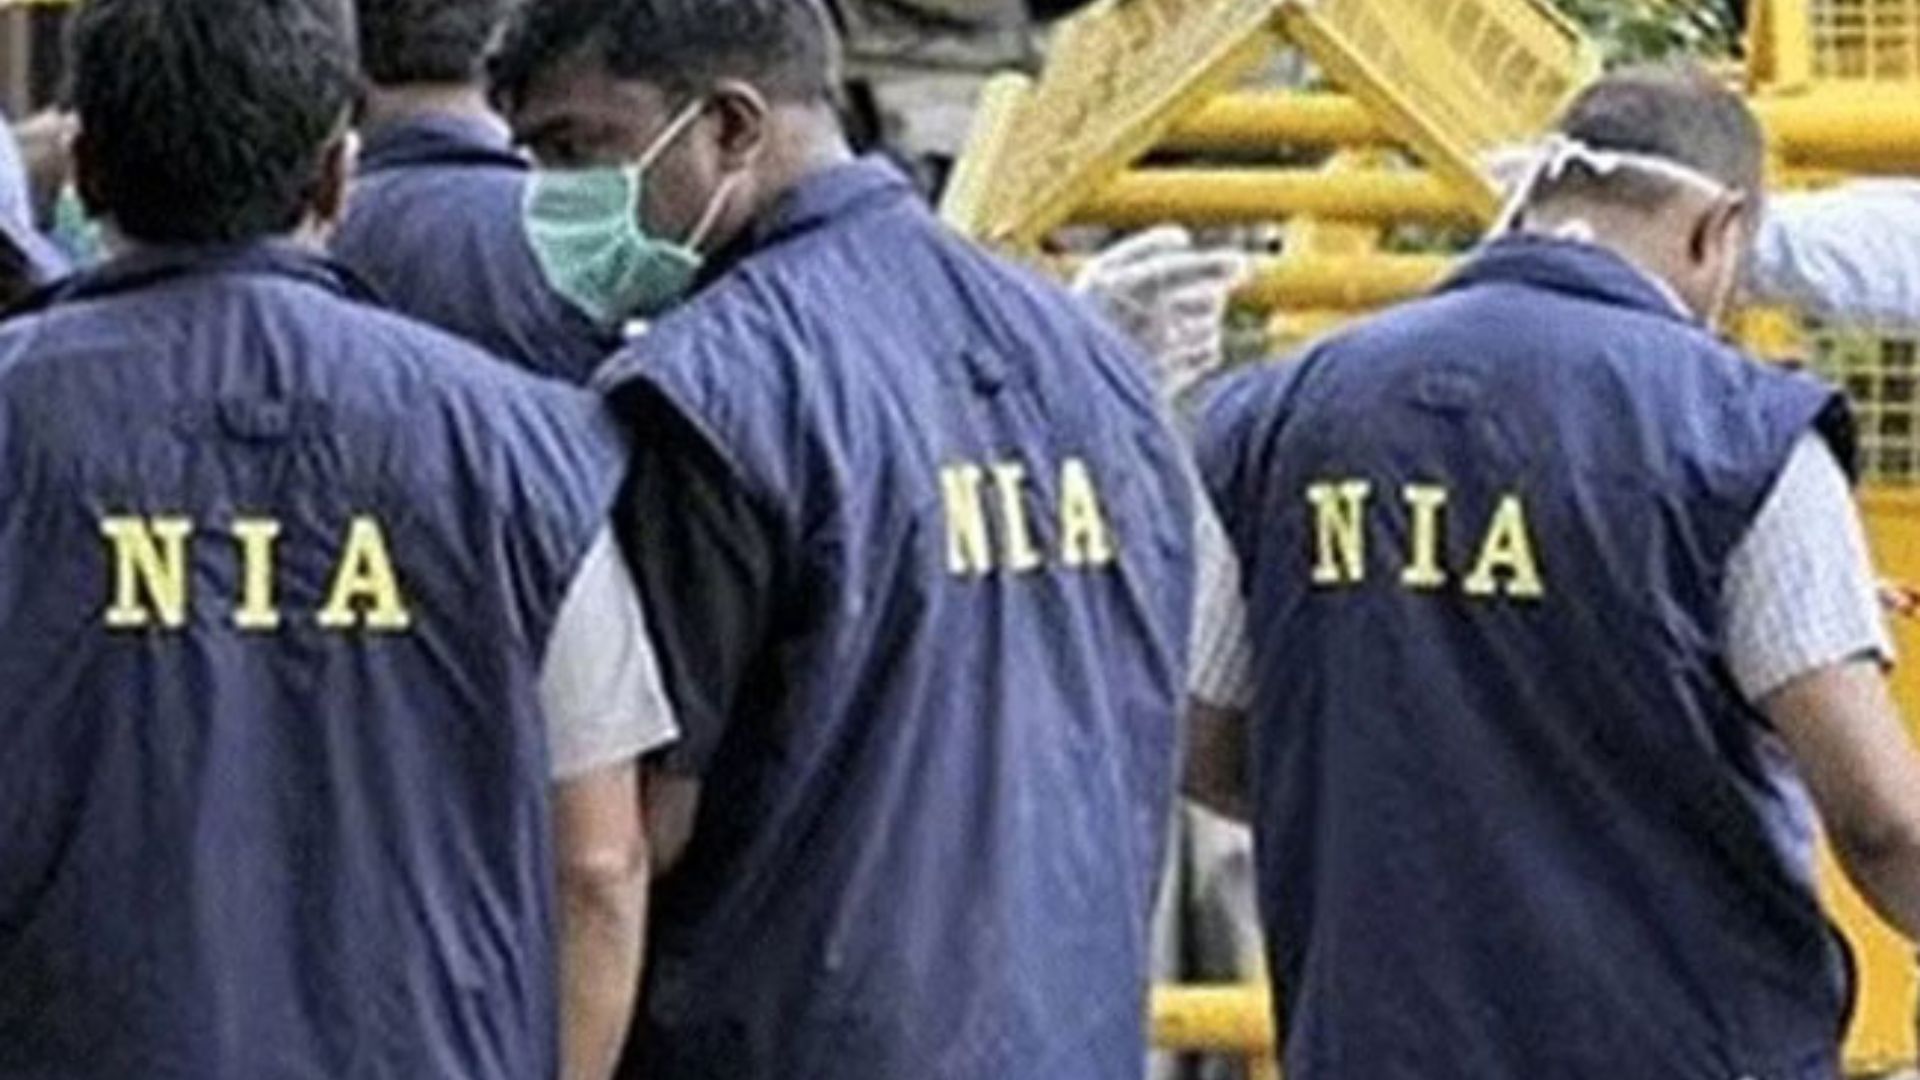 NIA has made another arrest in the Attari drugs seizure case, bringing the total number of arrests to eight